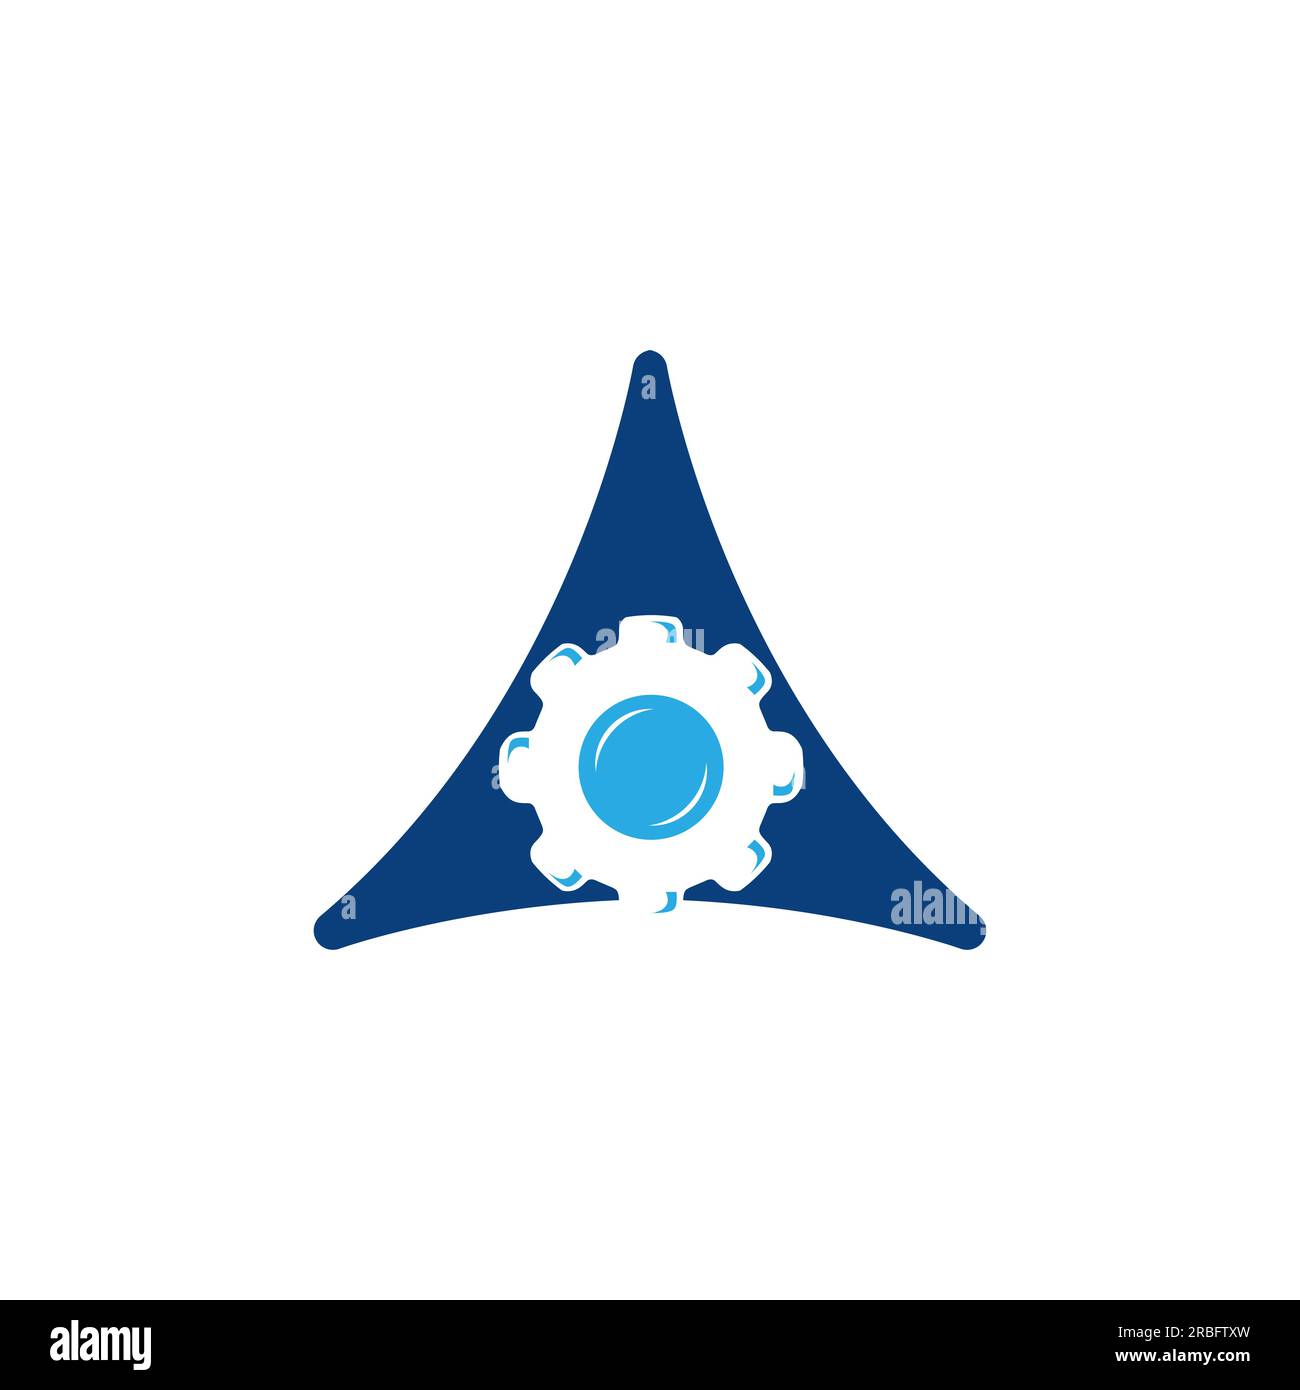 Triangle Trinity and gear icon vector logo design template download.EPS 10 Stock Vector